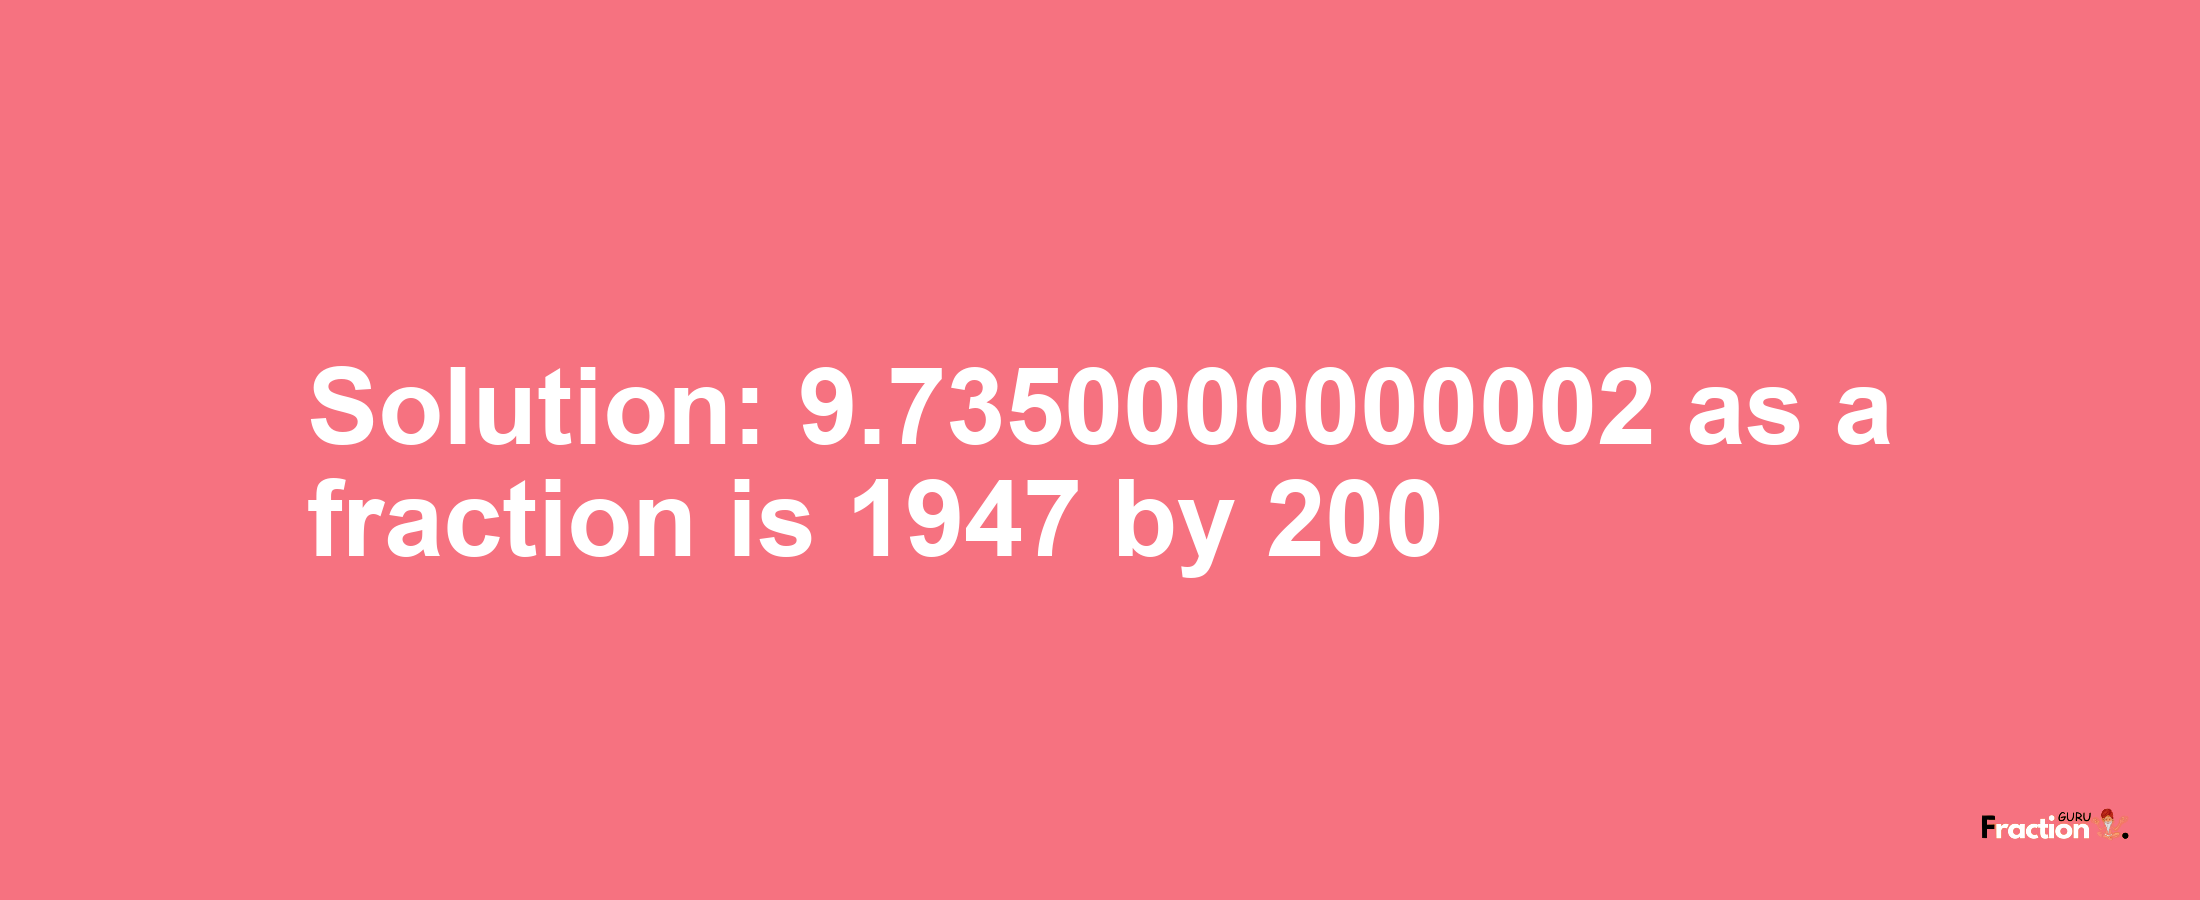 Solution:9.7350000000002 as a fraction is 1947/200